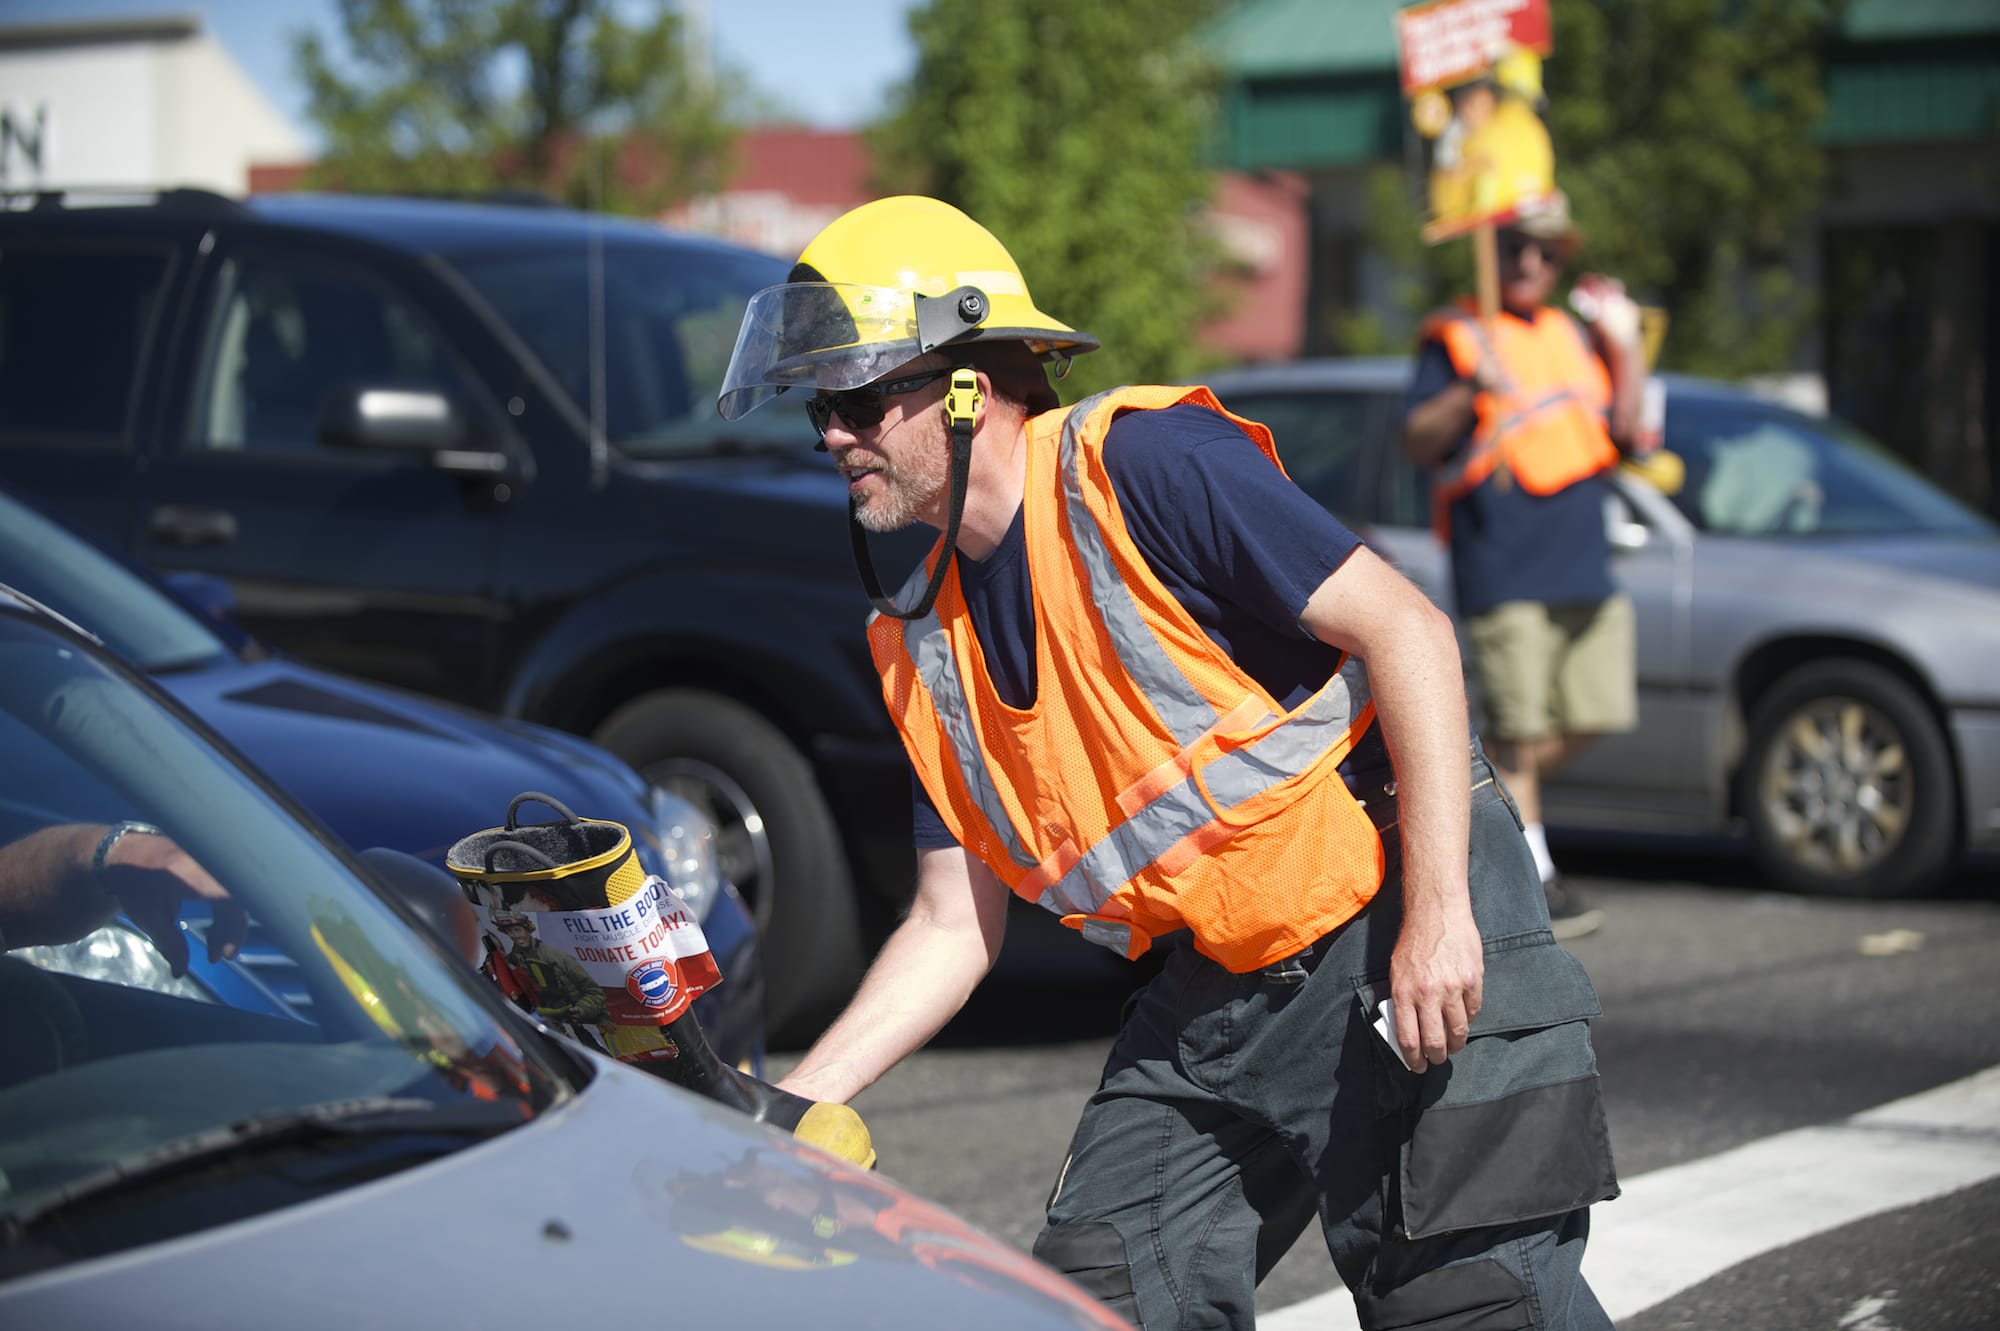 On Thursday, Vancouver firefighter Kevin Hart was among a group of off-duty fire service employees soliciting donations at Northeast Highway 99 and Northeast 78th Street.